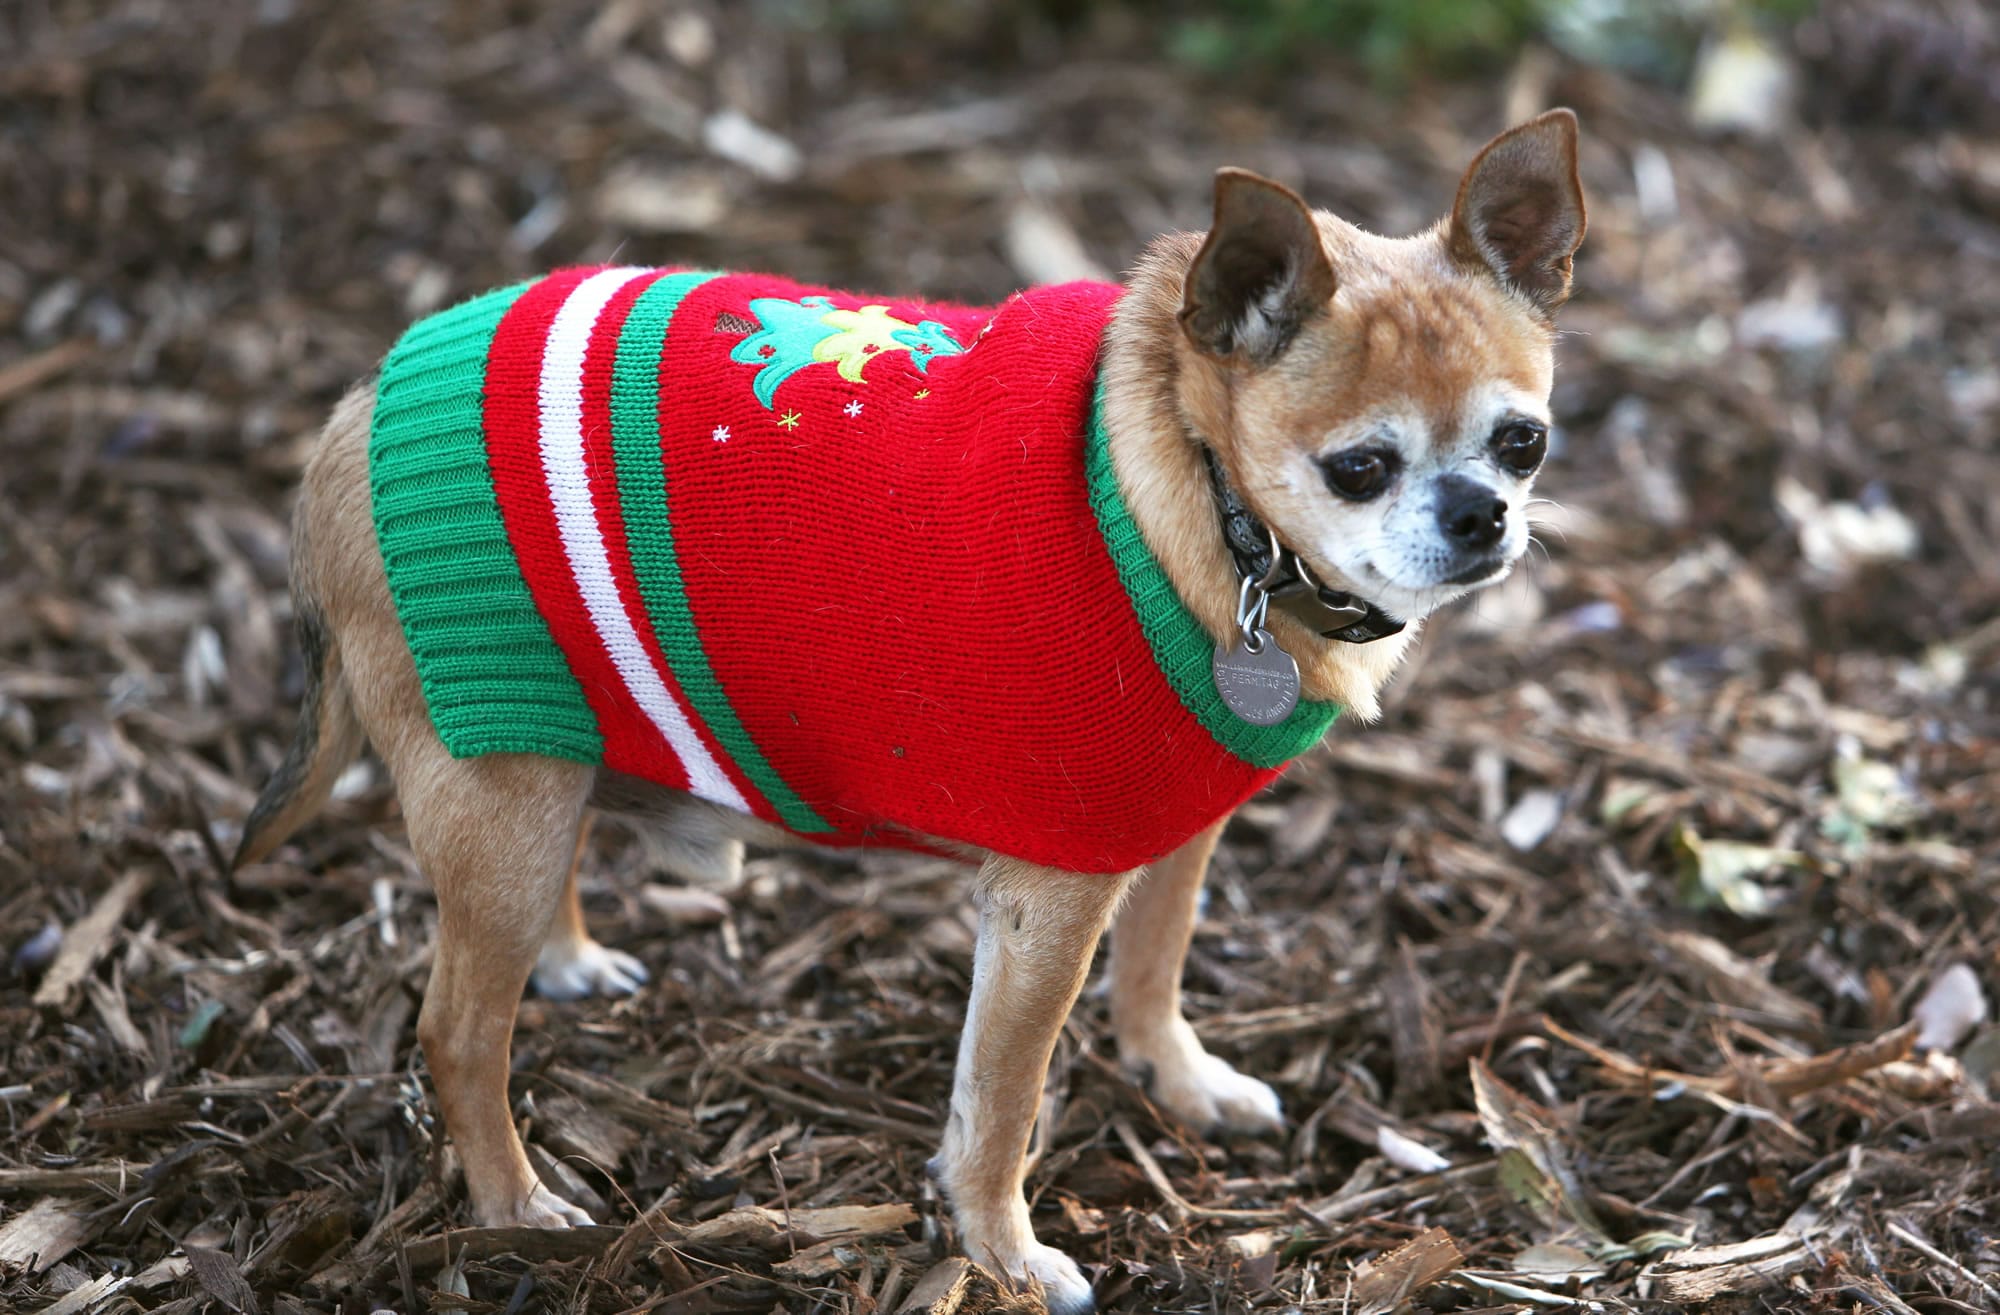 Right: Eight-year old Chihuahua Coco gets out in the winter cold in his new Christmas sweater in Los Angeles.